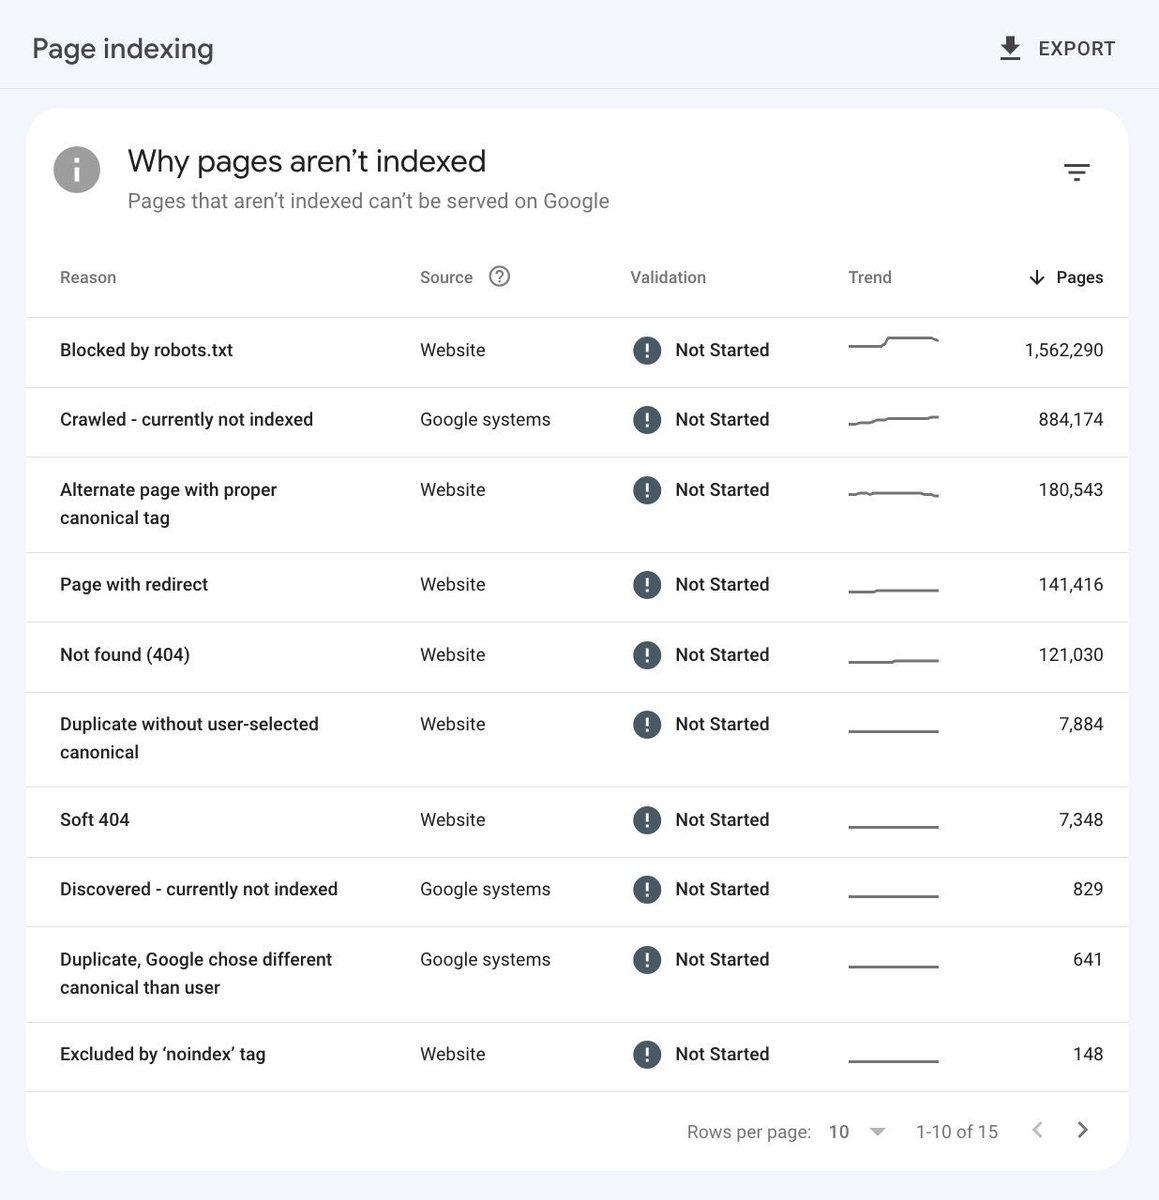 When working with large-scale sites, a question I'm often asked is: 'Does our page indexing report look alright to you?' My response to this is generally that it looks fine on the surface, but only further digging into the reasons for pages being excluded can this be determined.…